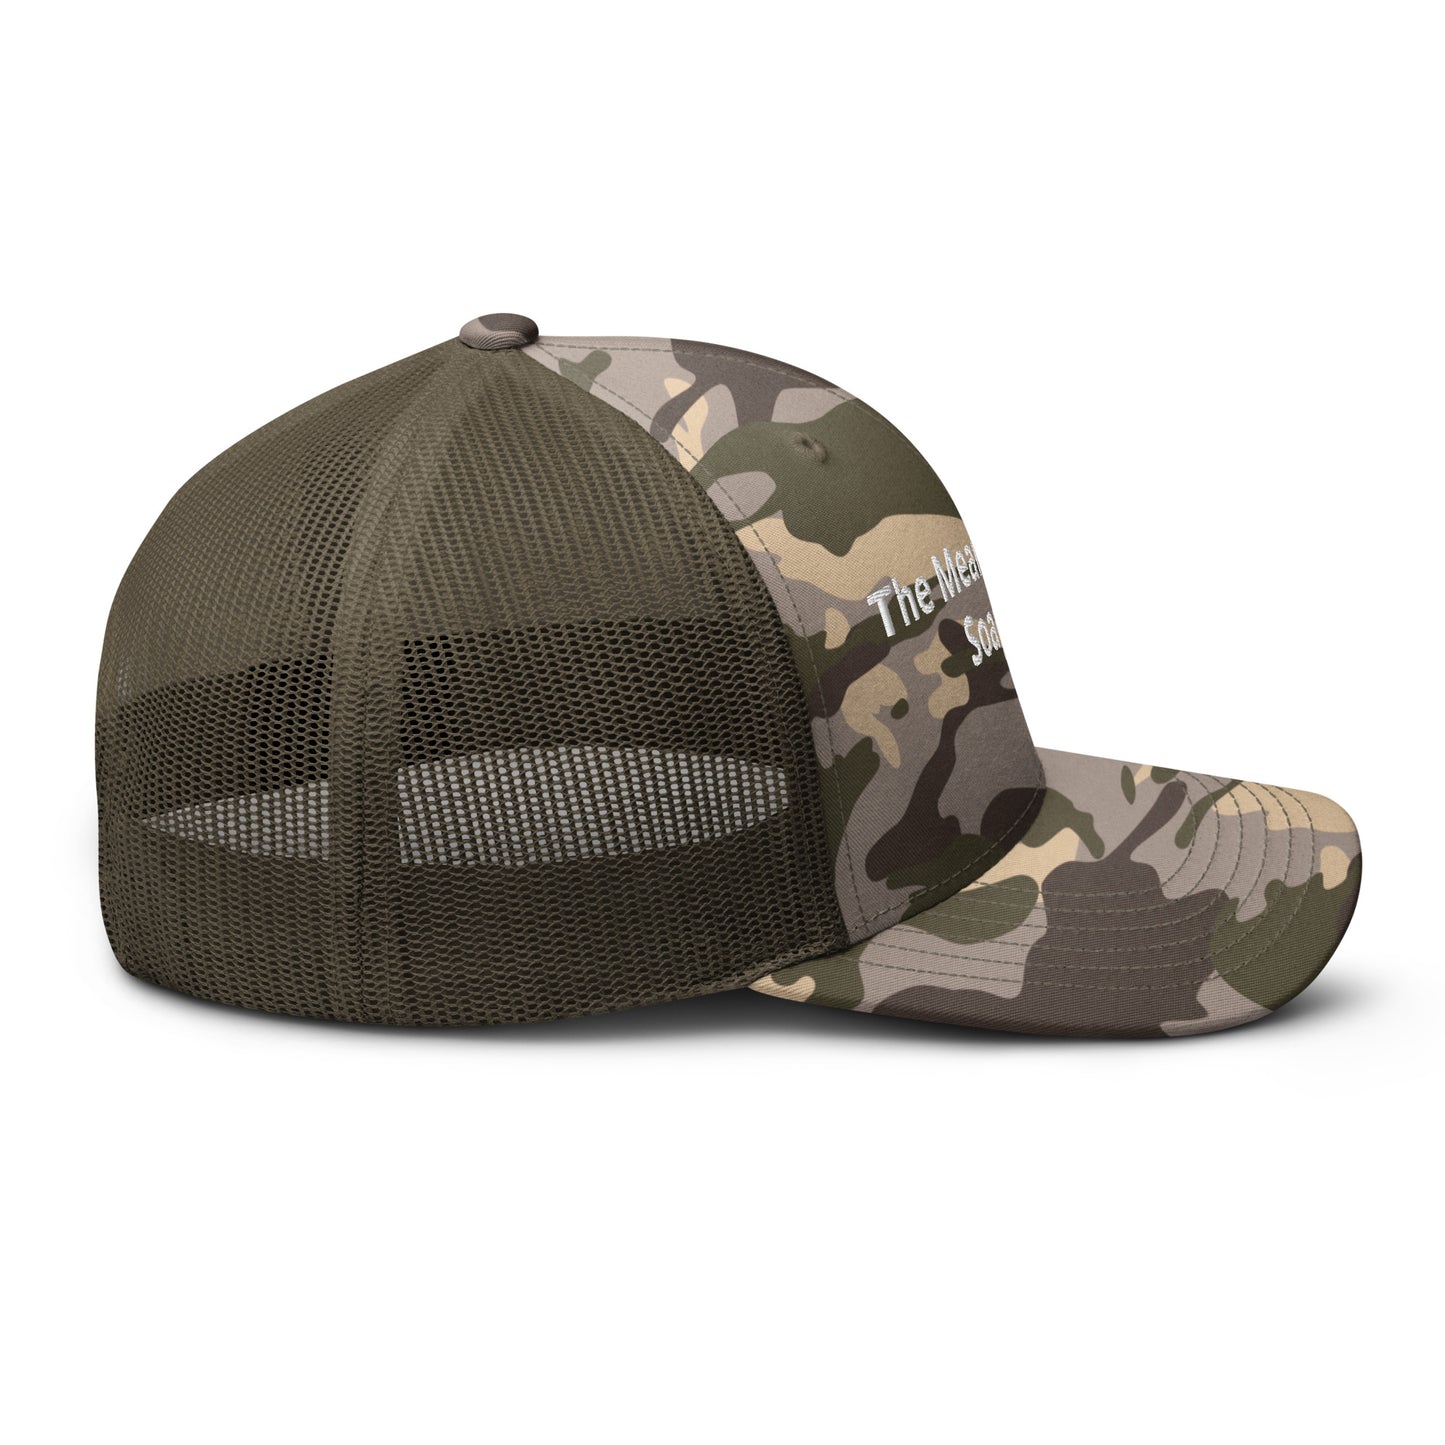 The Mean Extreme Recon Camo Trucker Hat